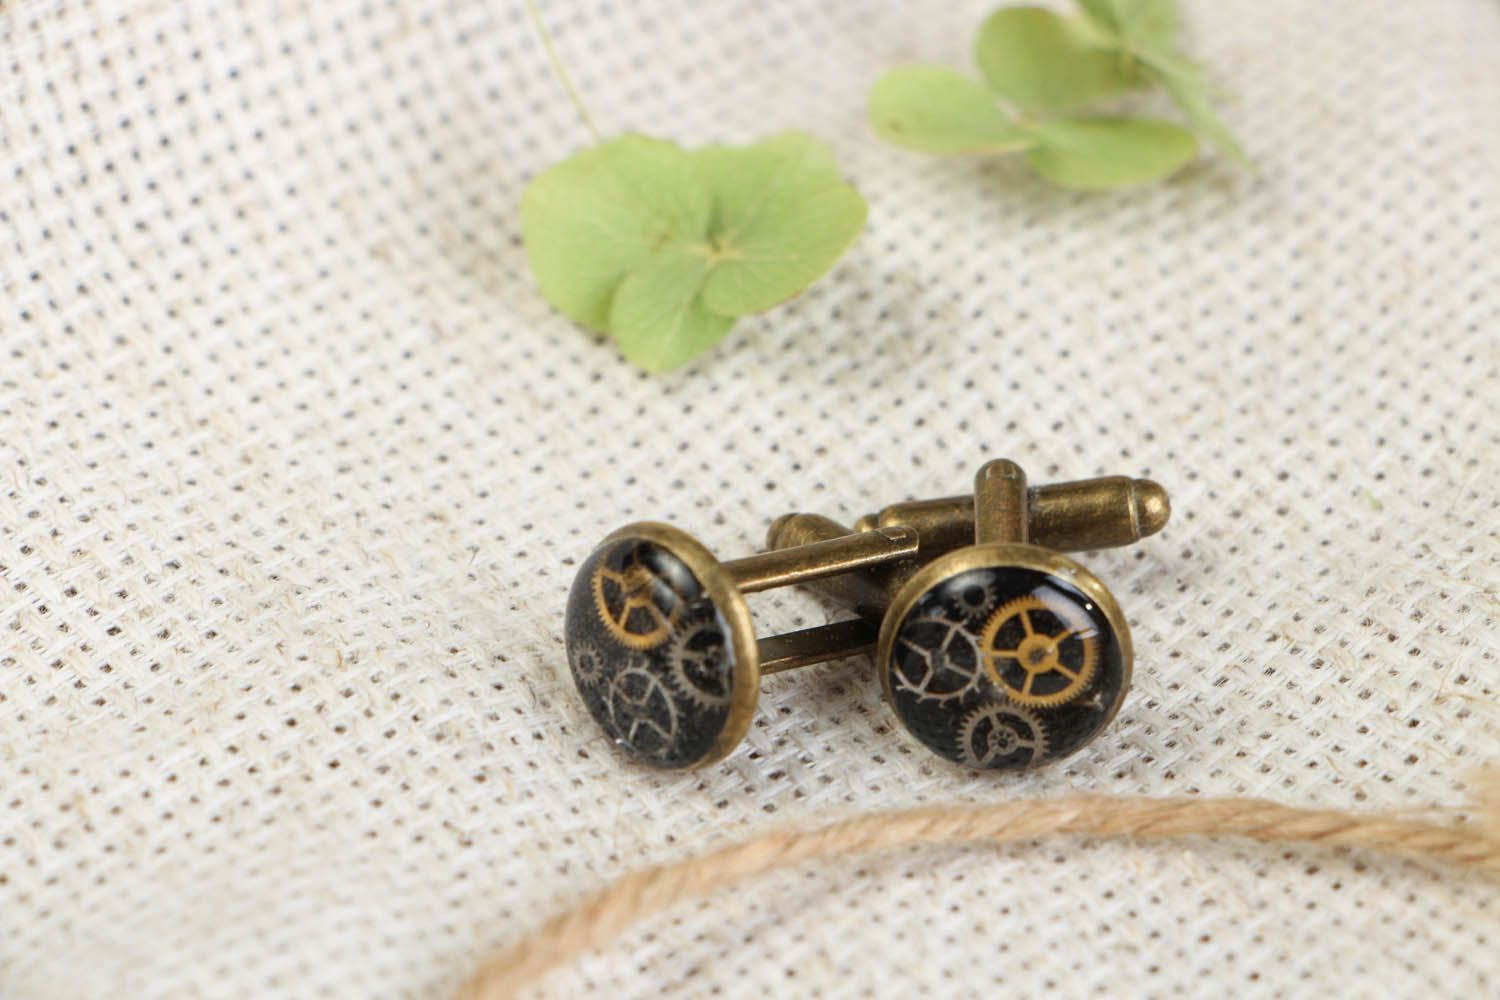 Cuff links with watch details in steam punk style photo 1